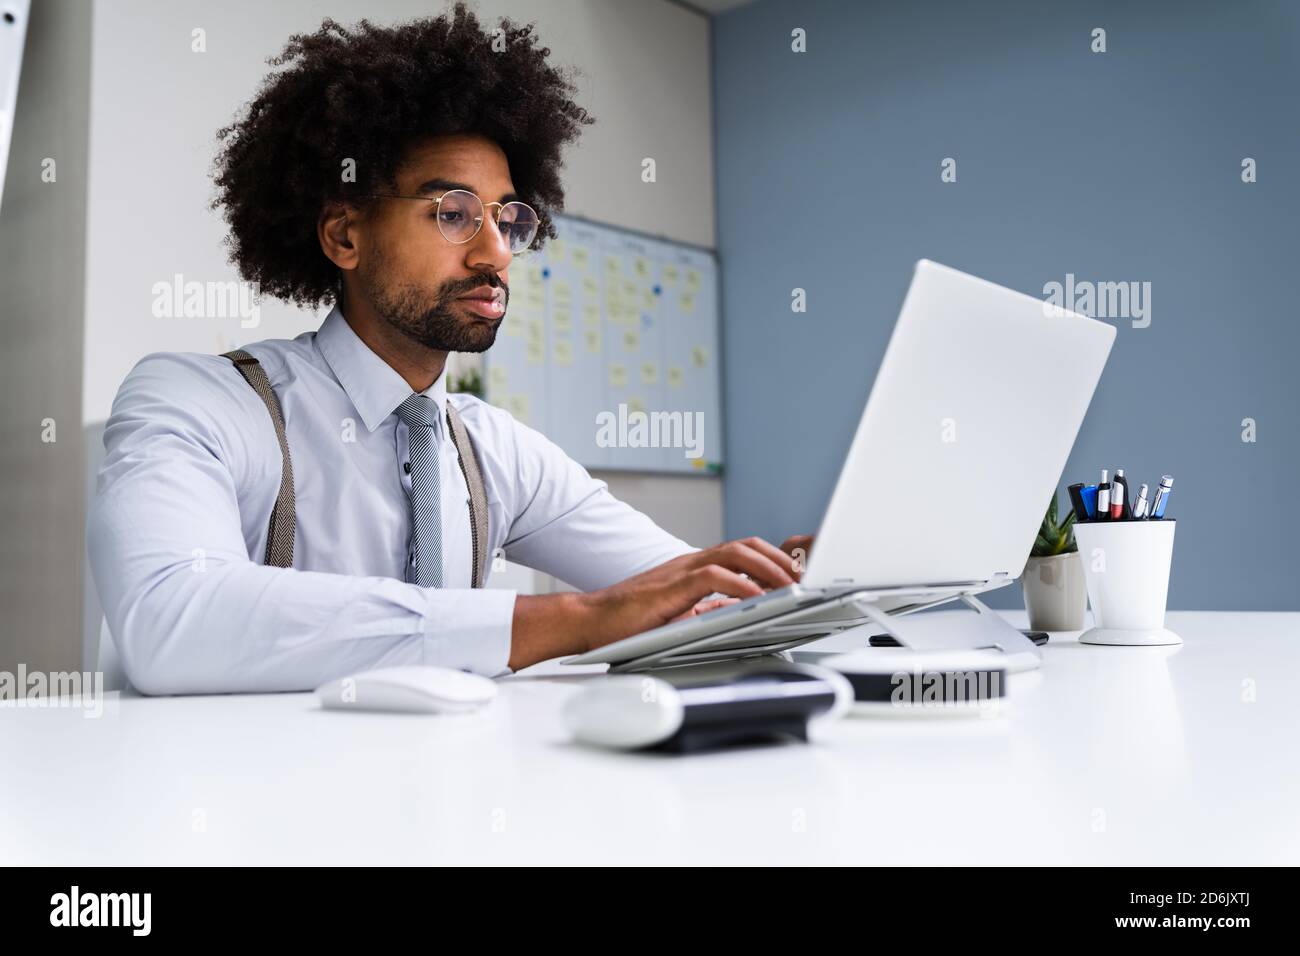 African American Business Man Using Laptop Computer In Office Stock Photo